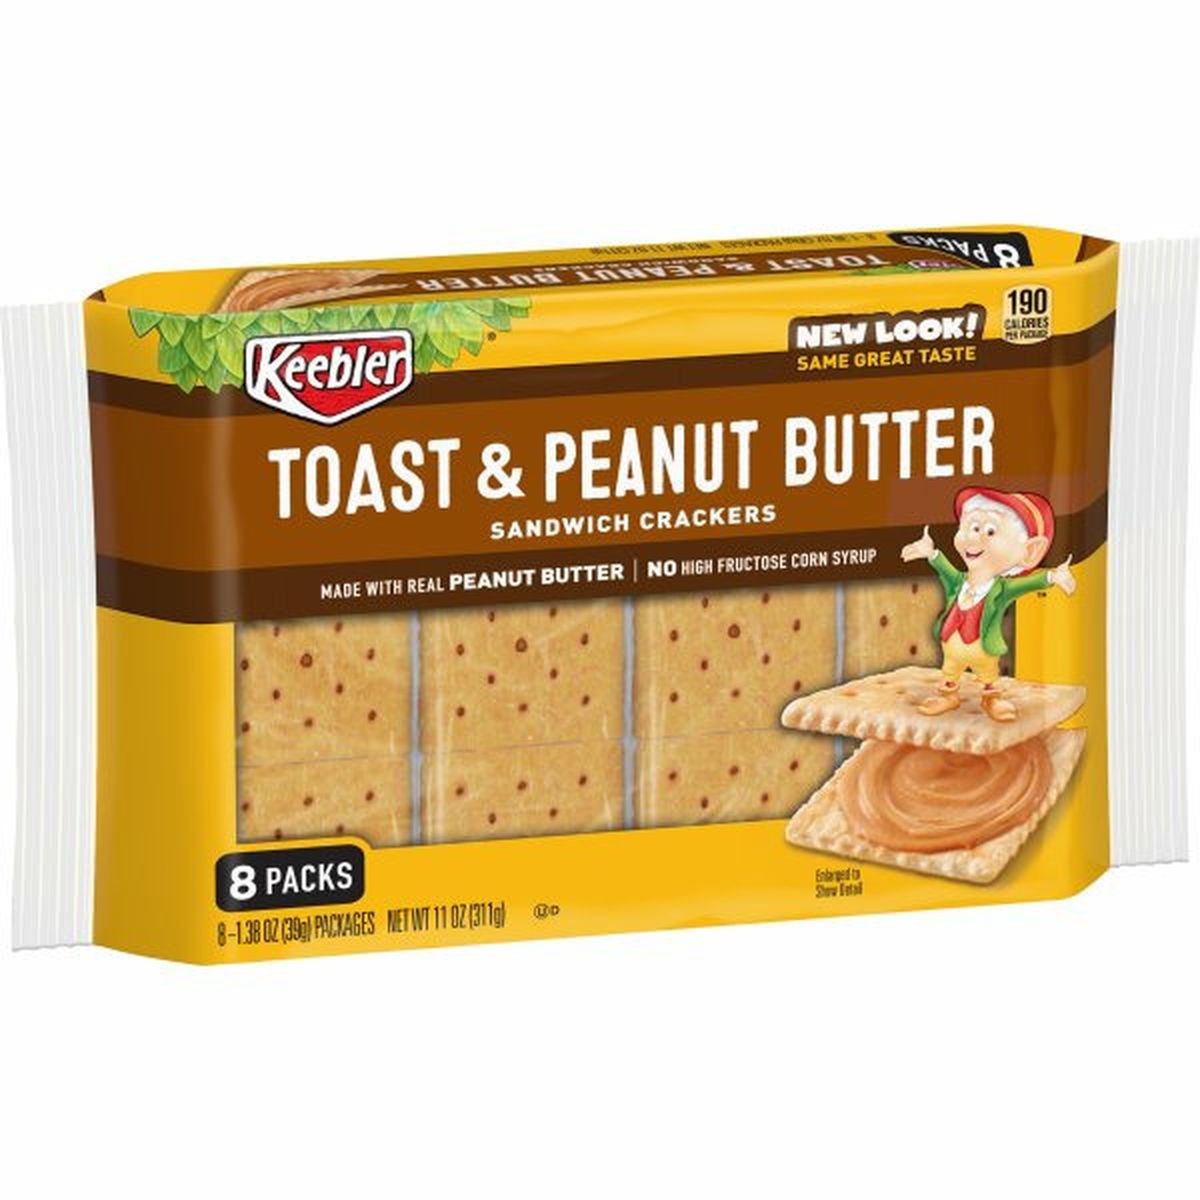 Calories in Keebler Sandwich Crackers, Toast and Peanut Butter